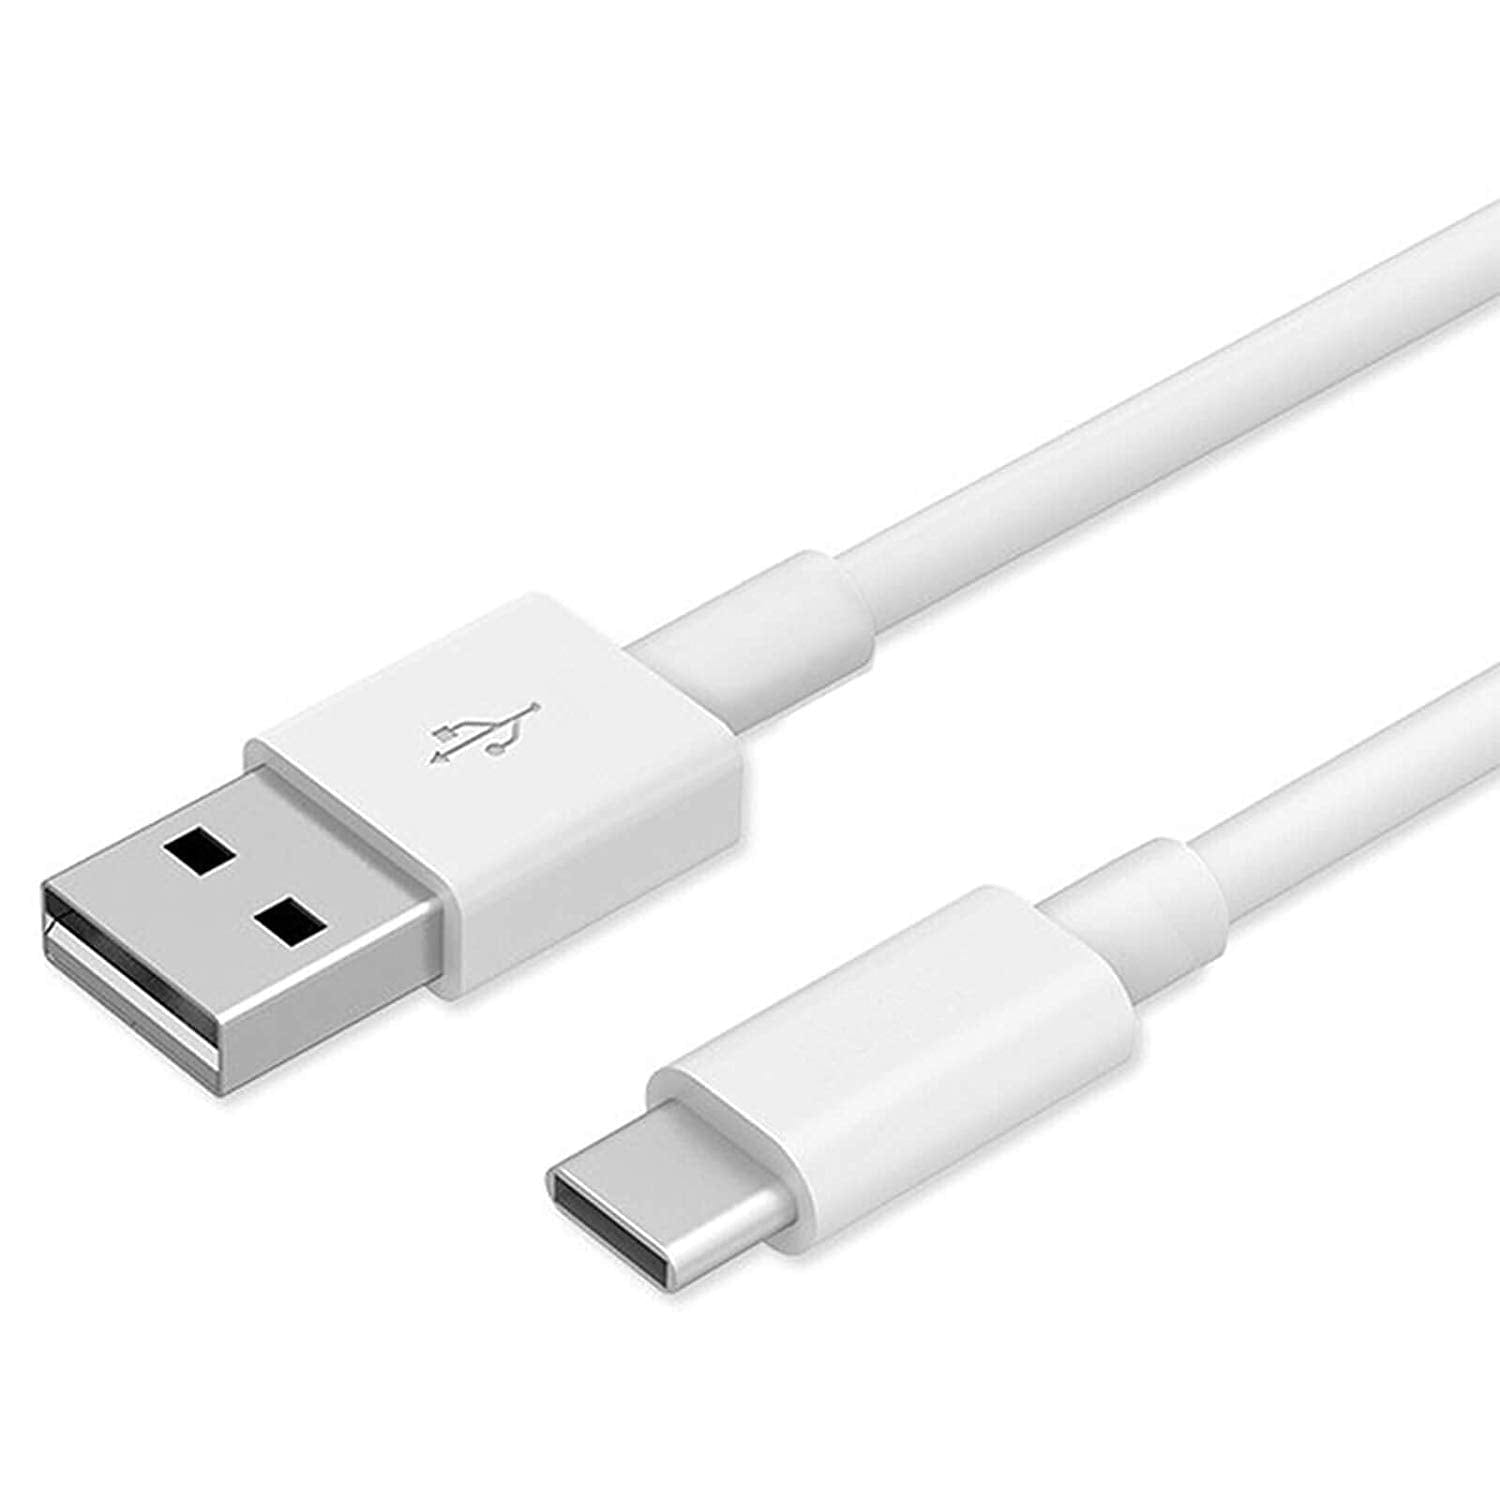 Samsung Galaxy A72 USB to Type C Charging Cable In Car White - 25 CM Short - SmartPhoneGadgetUK